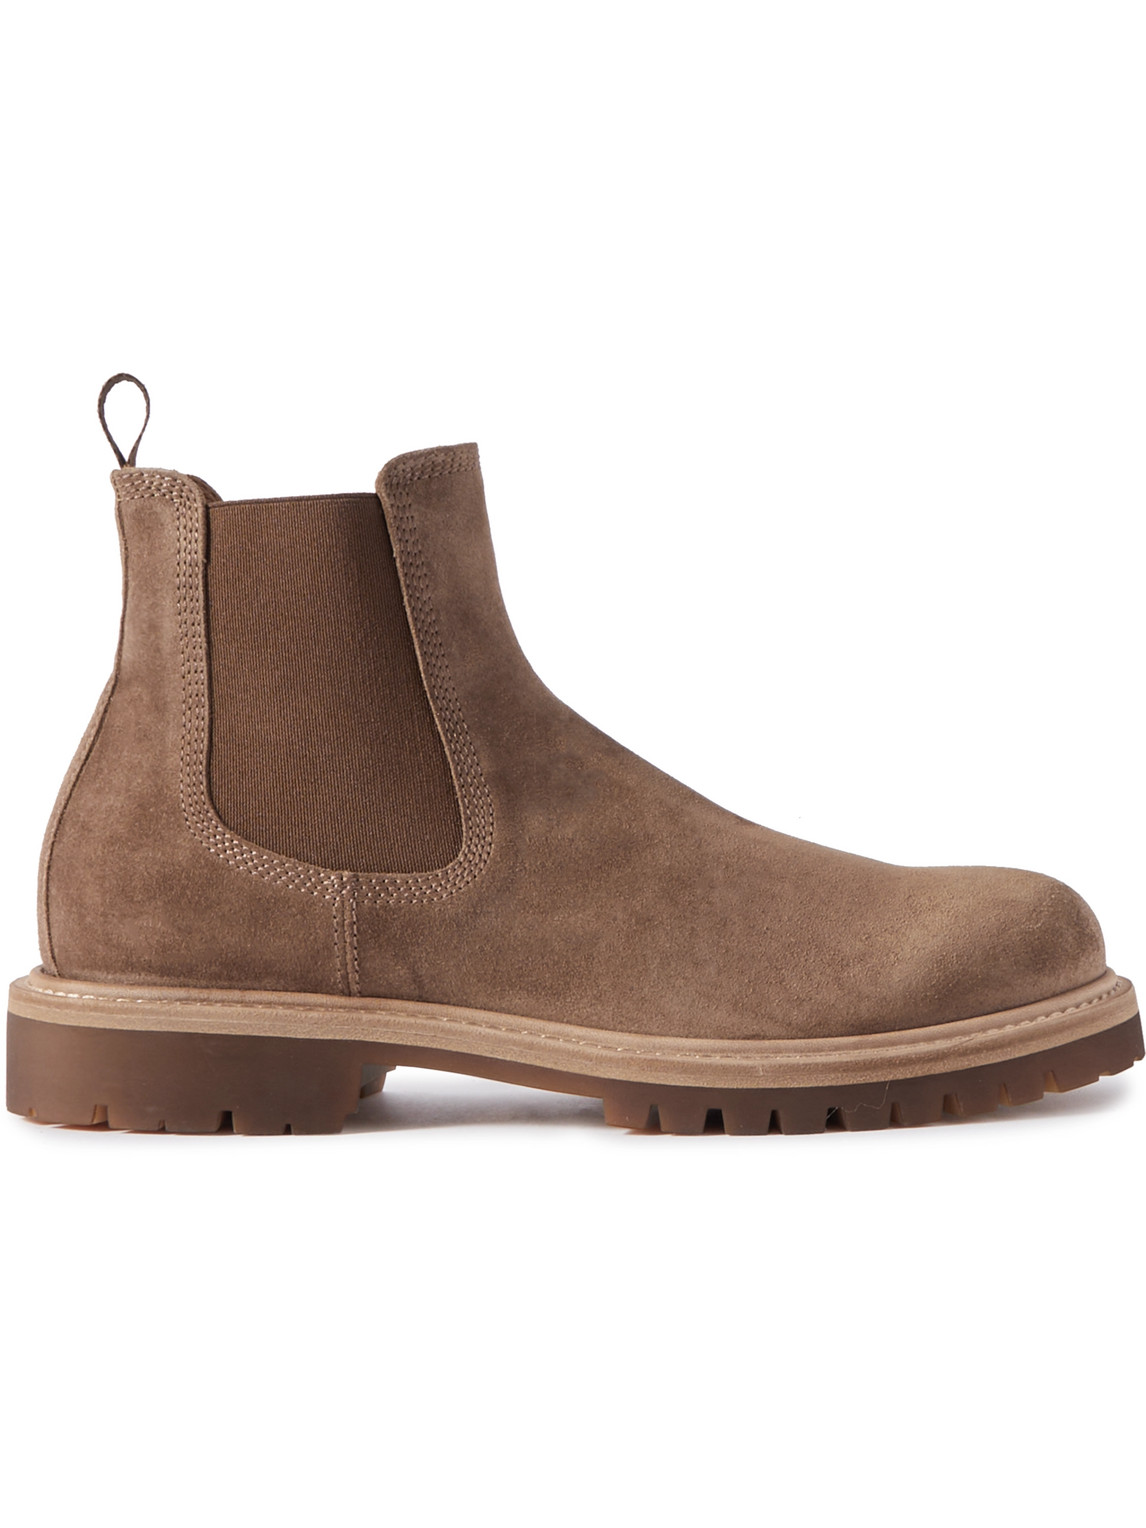 OFFICINE CREATIVE BOSS SUEDE CHELSEA BOOTS